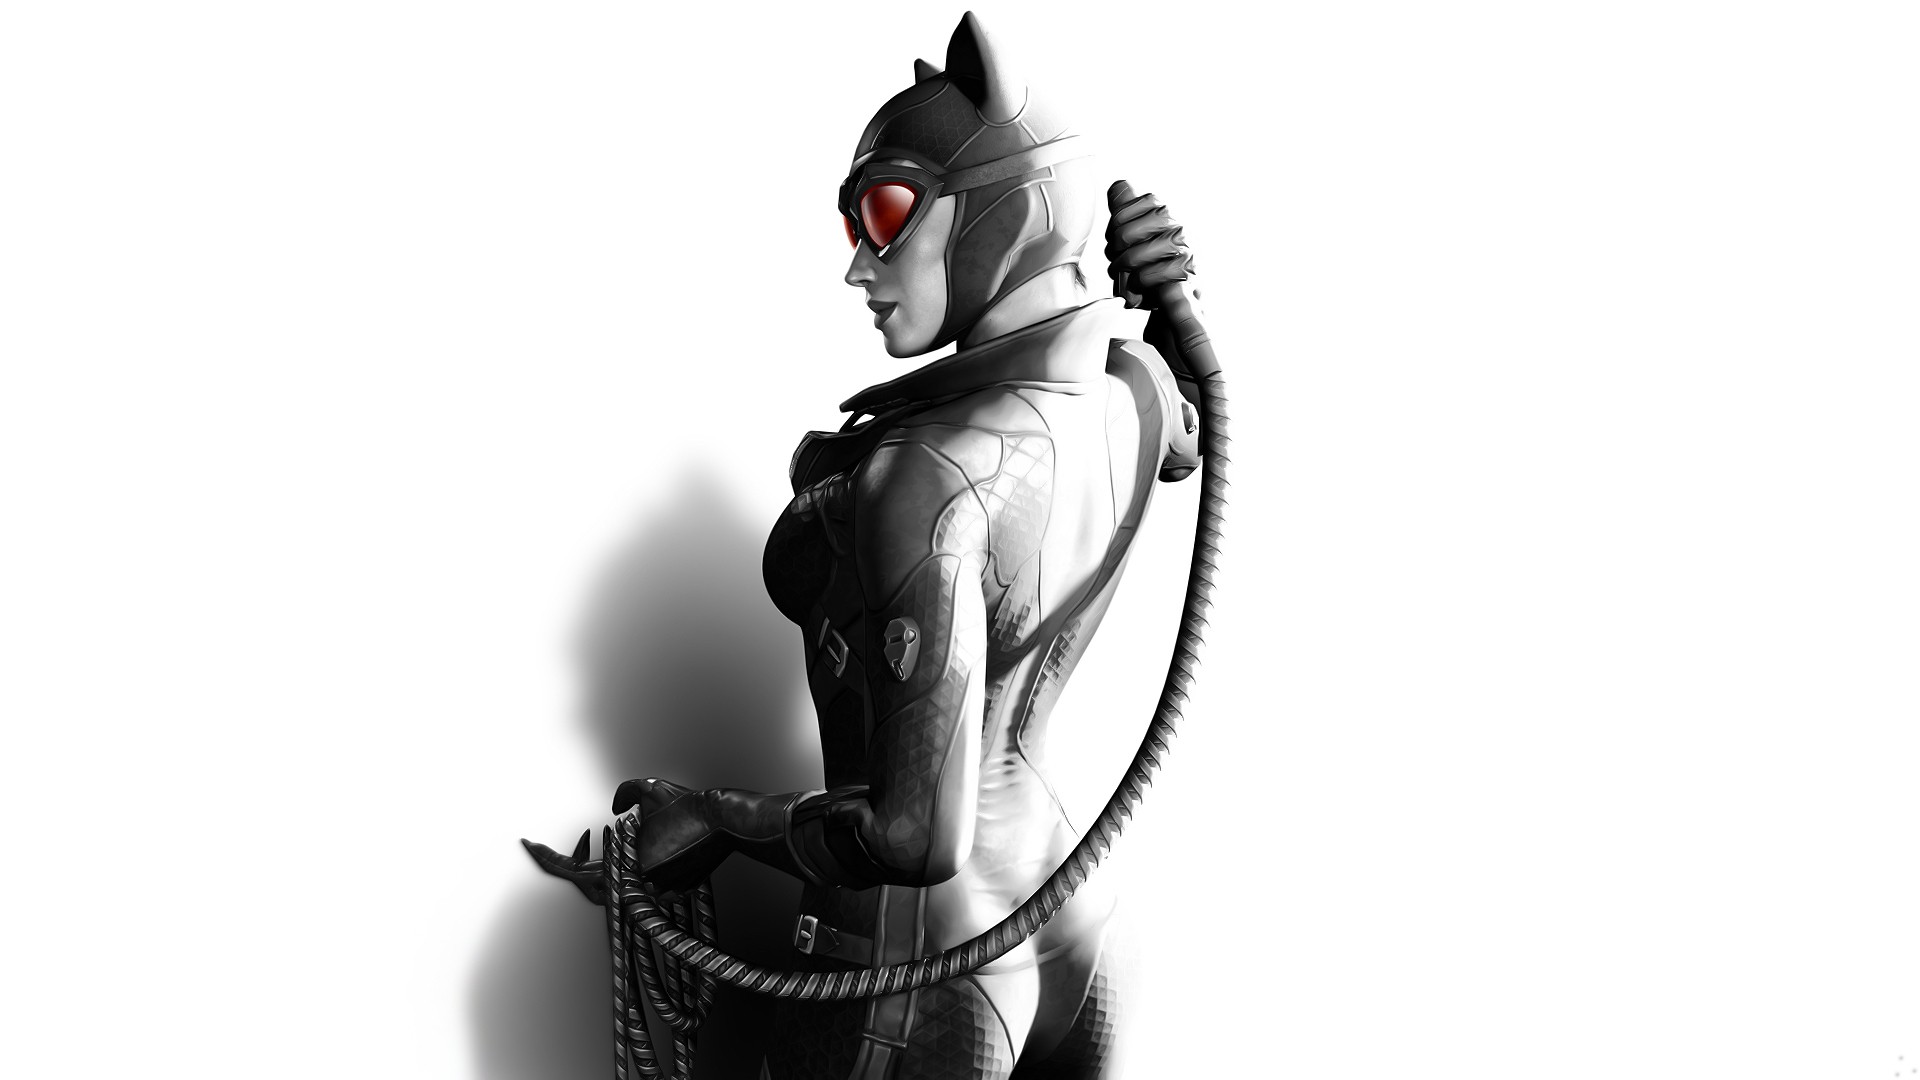 General 1920x1080 video games Catwoman selective coloring video game art